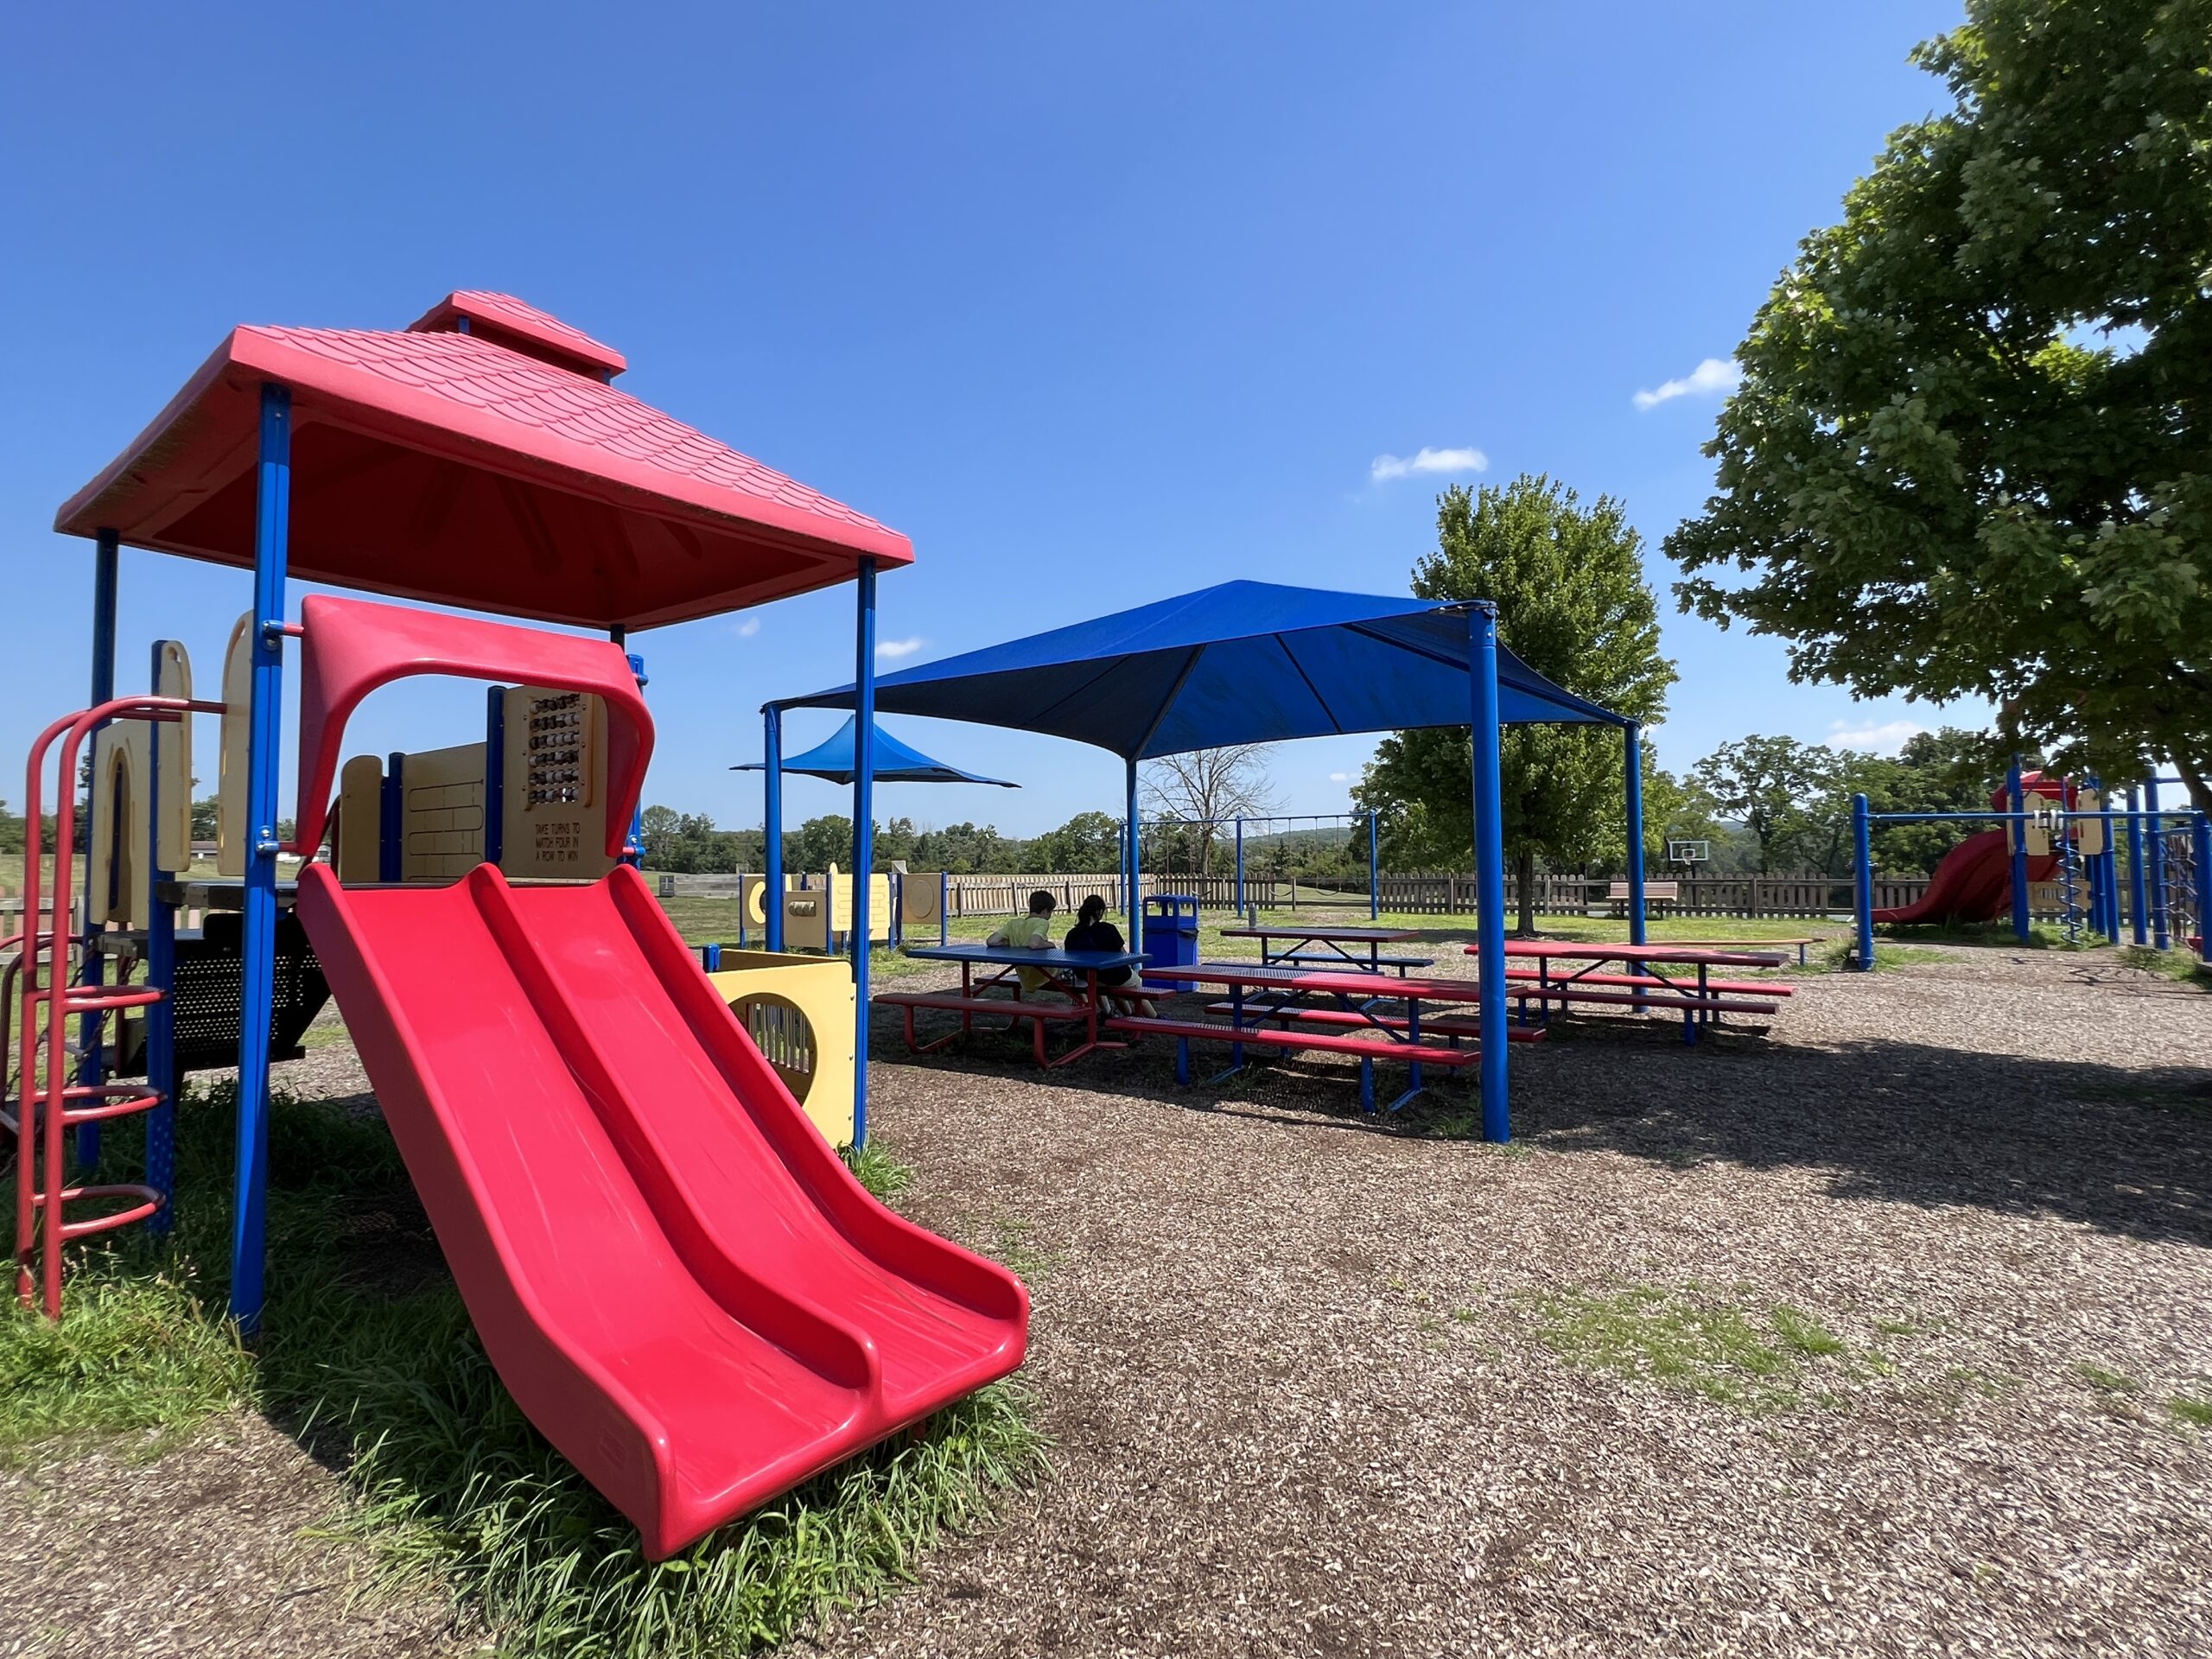 Alexandria Township Park Playground in Milford NJ - WIDE image - red roof playground With picnic tables under canopy SHADY